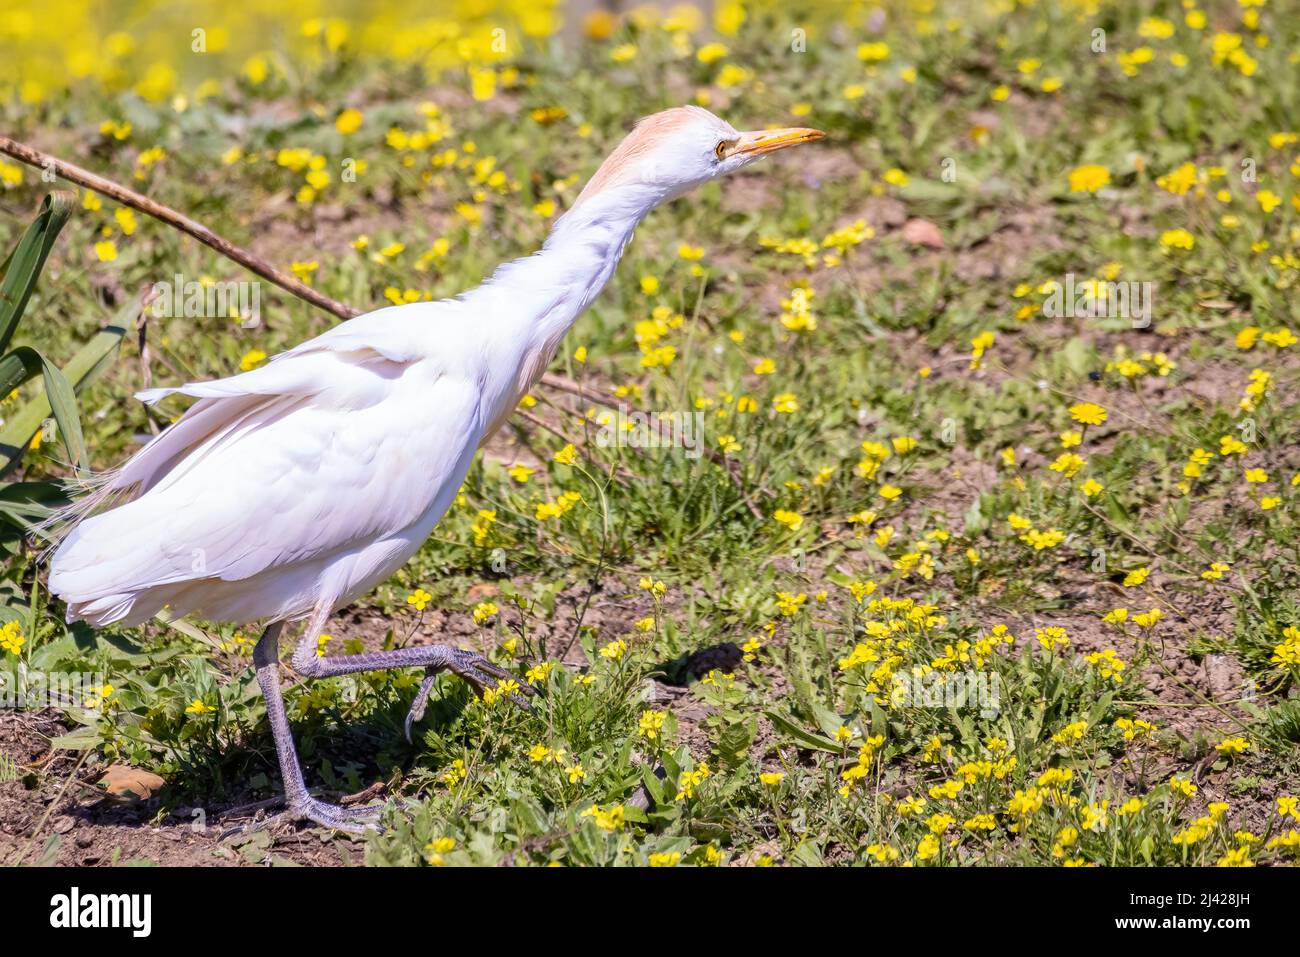 A cattle egret (Bubulcus ibis), a cosmopolitan species of heron (family Ardeidae) found in the tropics, subtropics, and warm-temperate zones Stock Photo